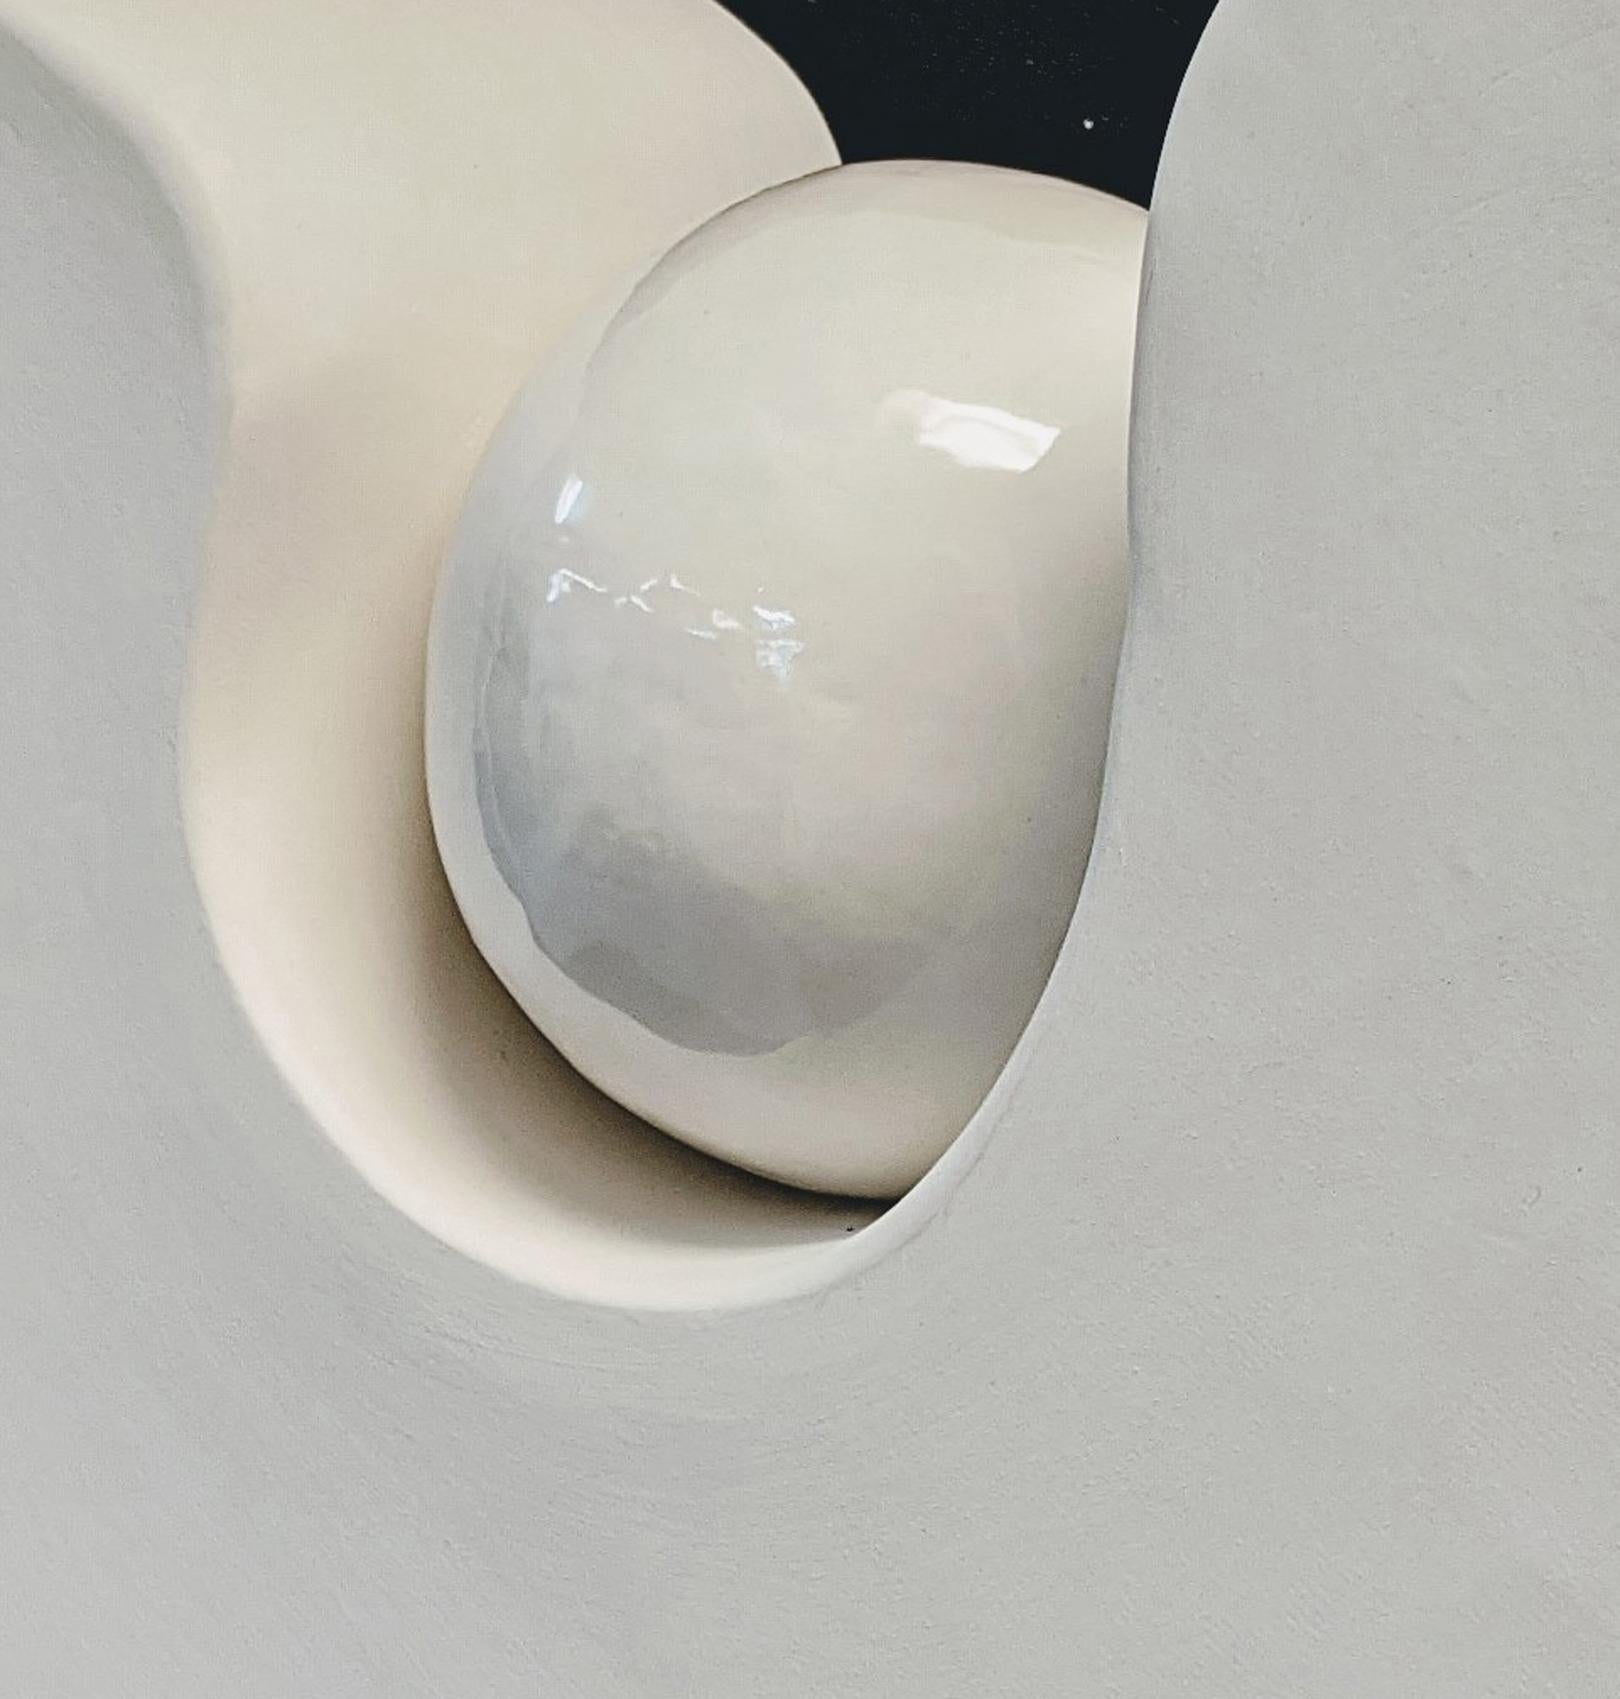 Jane B Grimm
Rhapsody VII, 2020
ceramic 15 x 21 x 5 in

White amorphic abstract sculpture with ball, created with hand formed ceramic. Dimensions are 15 x 21 x 5 inches. A wonderful ceramic sculpture by Jane B. Grimm who began her artistic career in